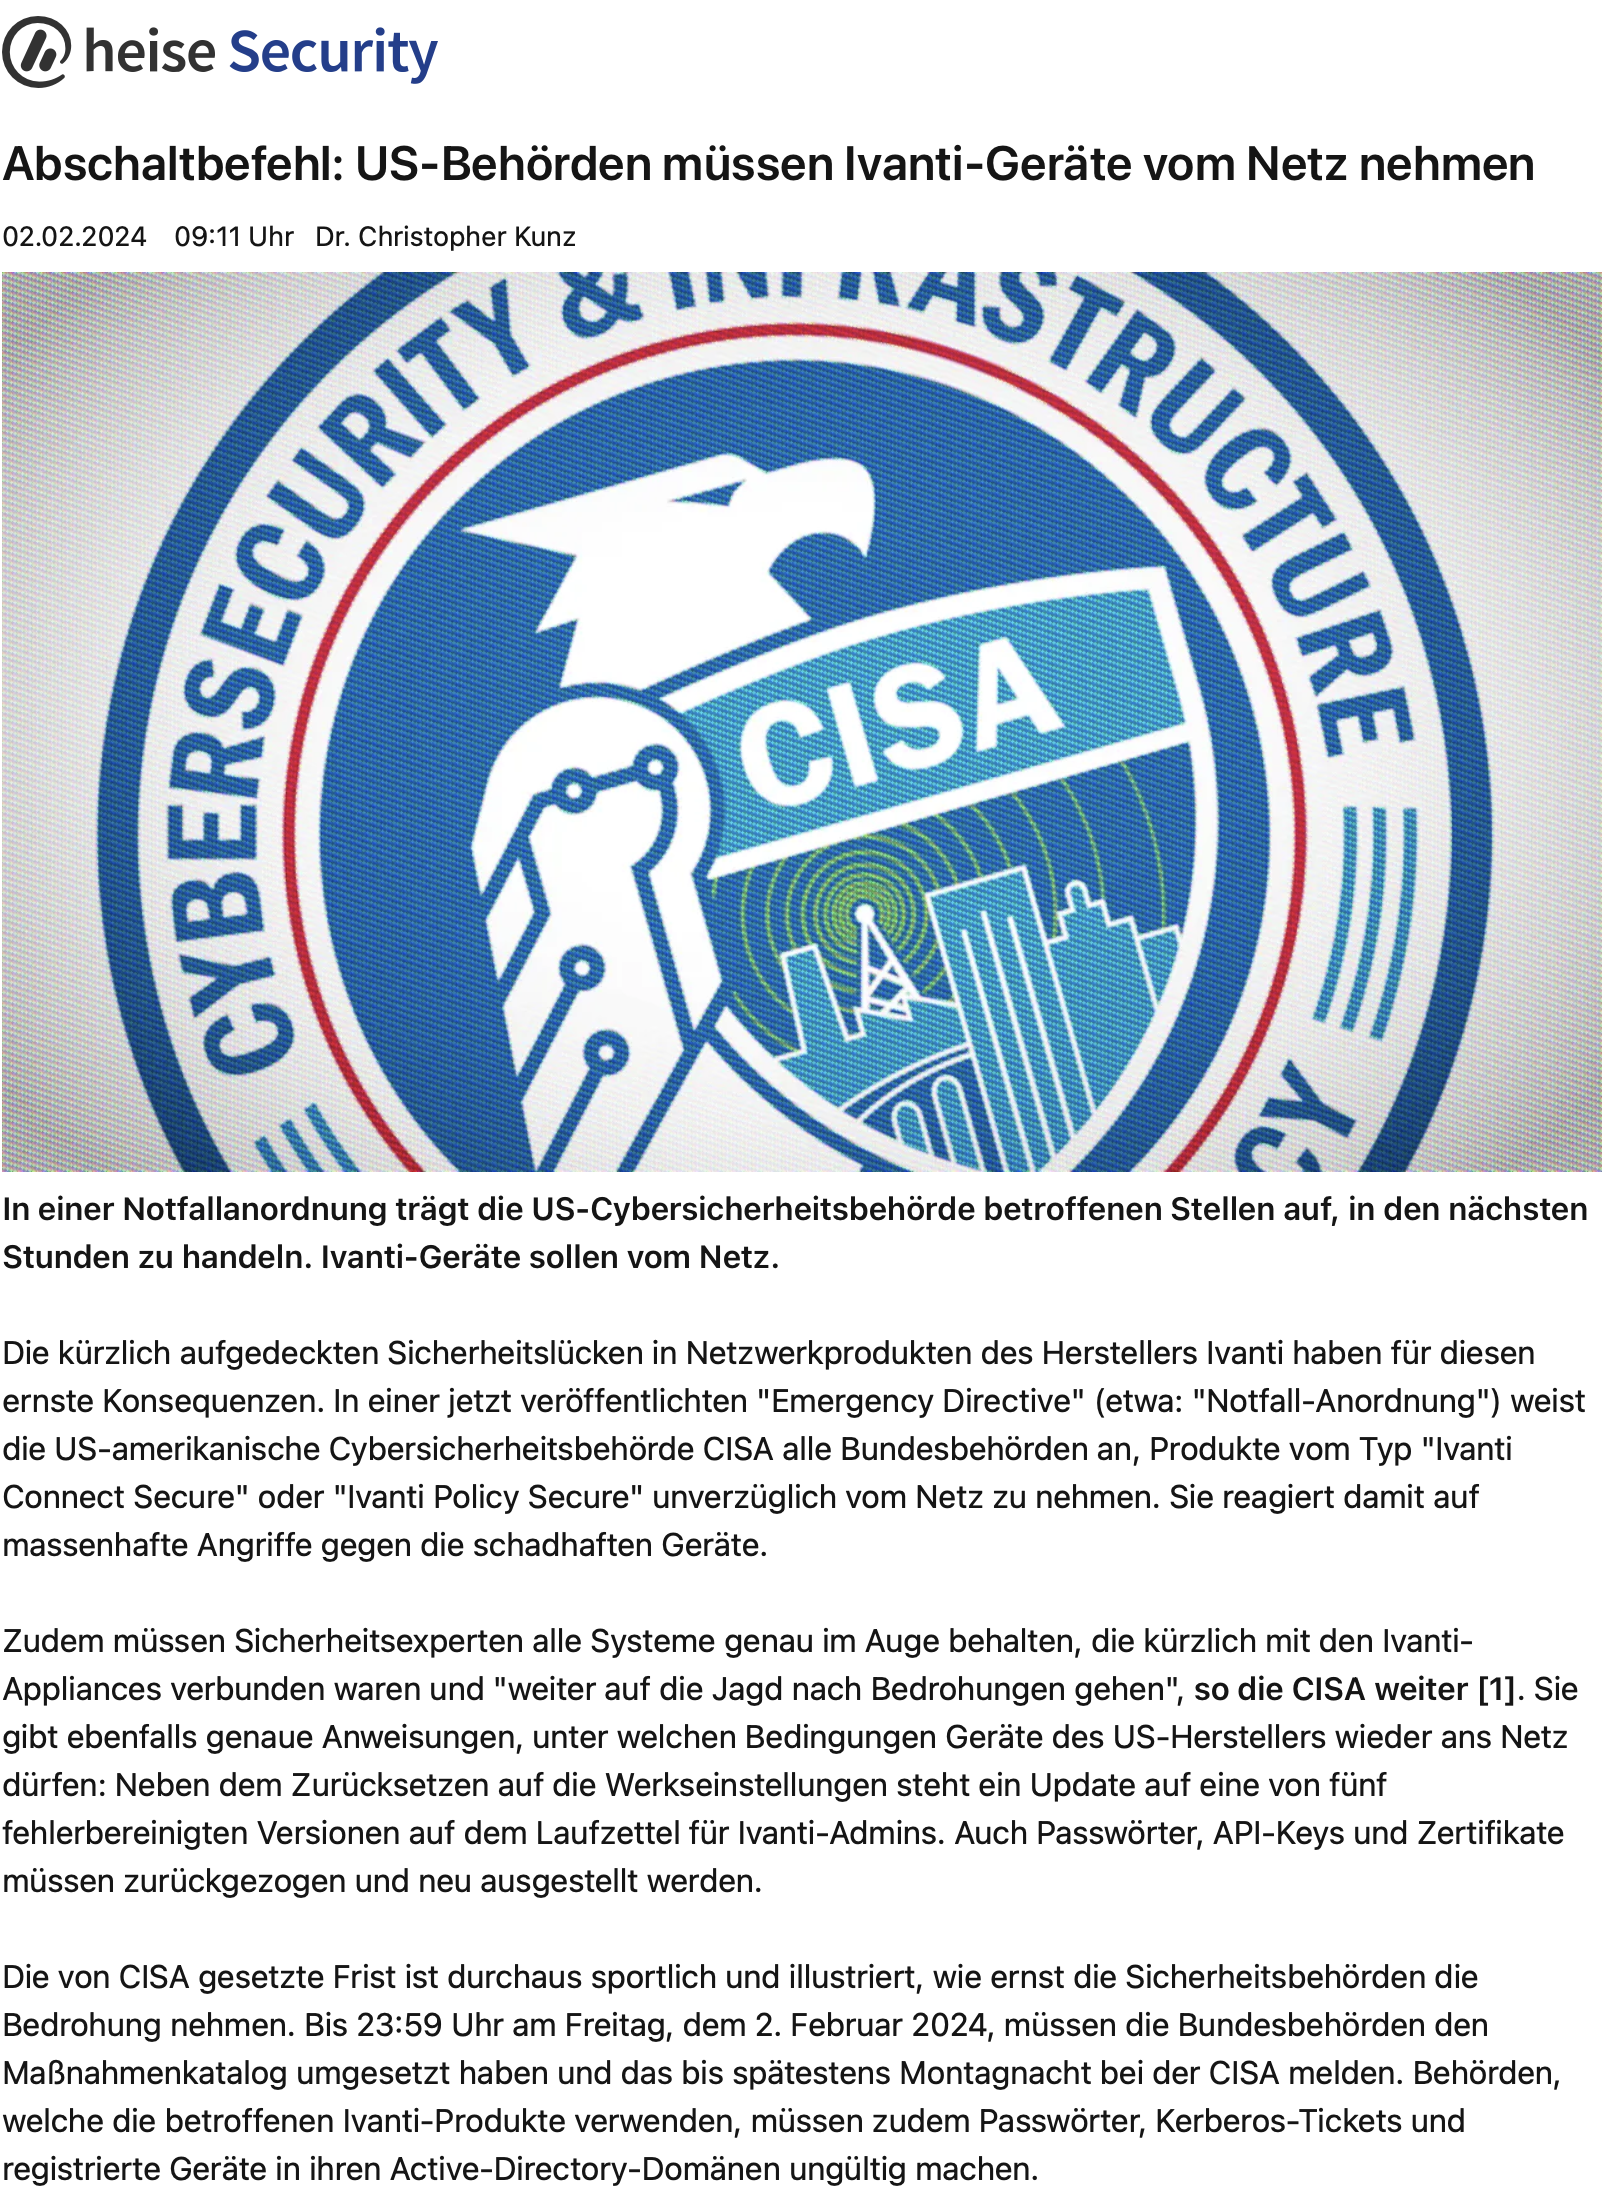 images/cisa-forced-take-down.png